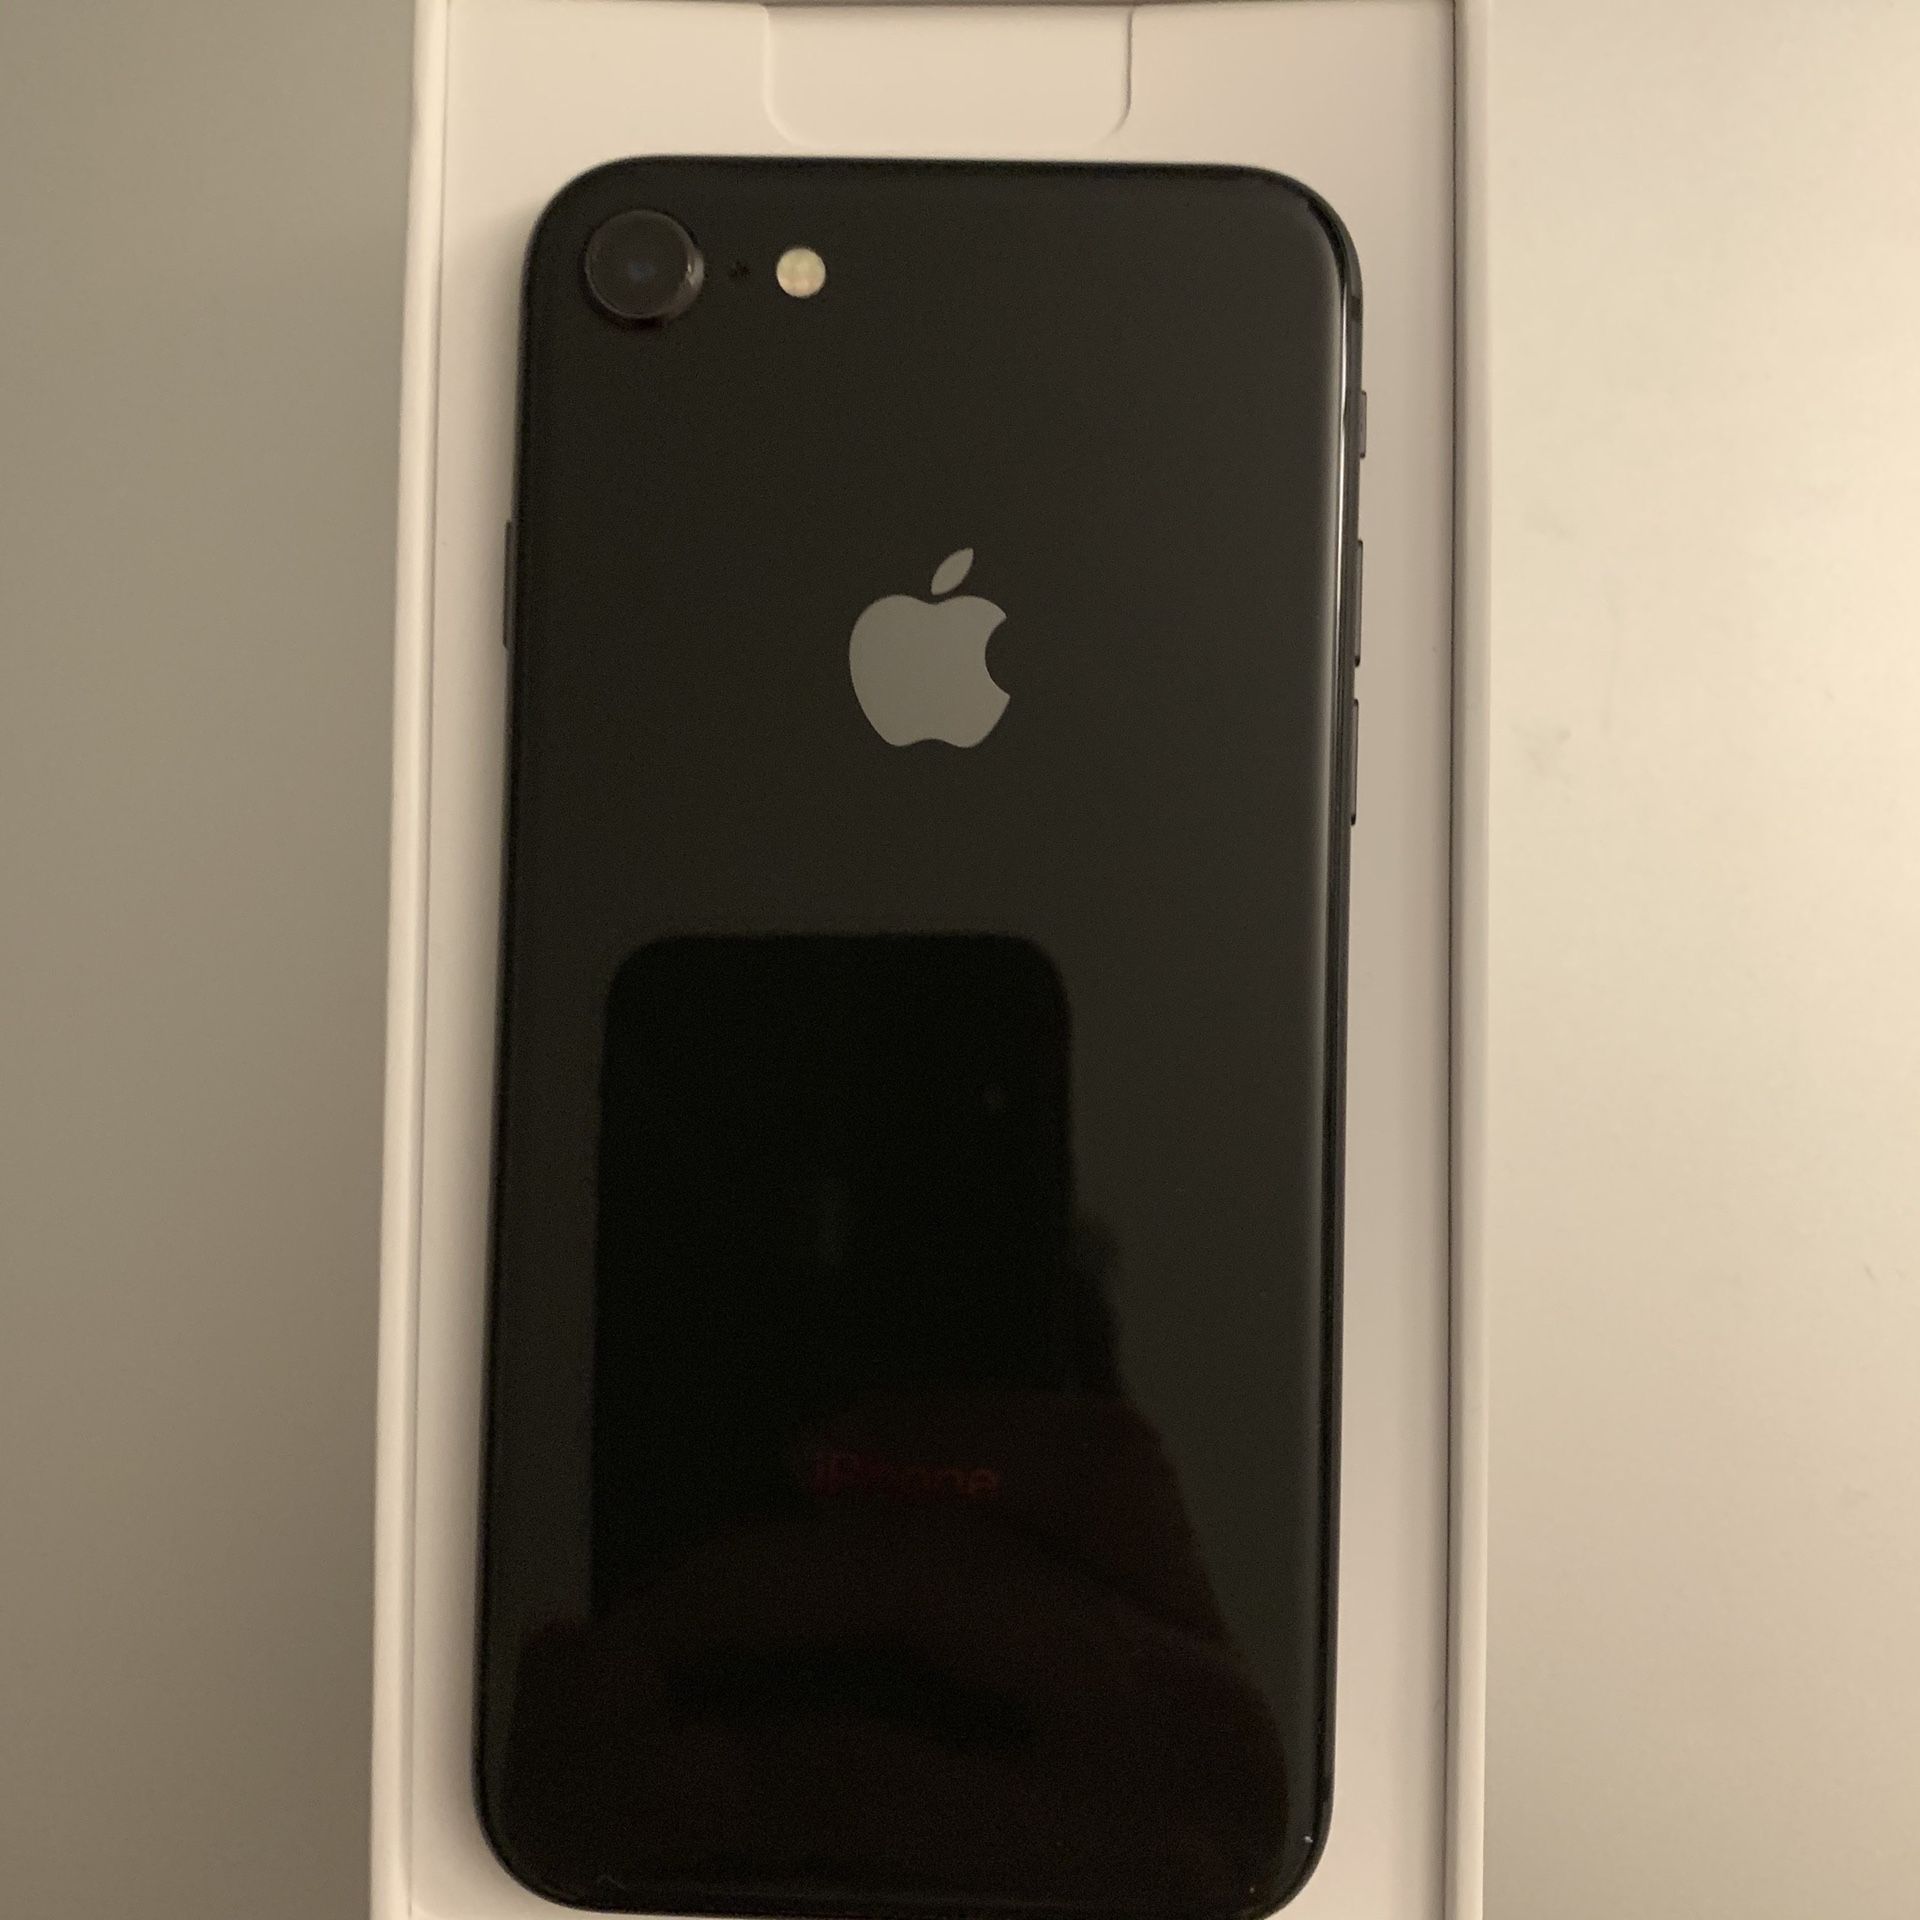 Iphone 8 ANY CARRIER 64GB